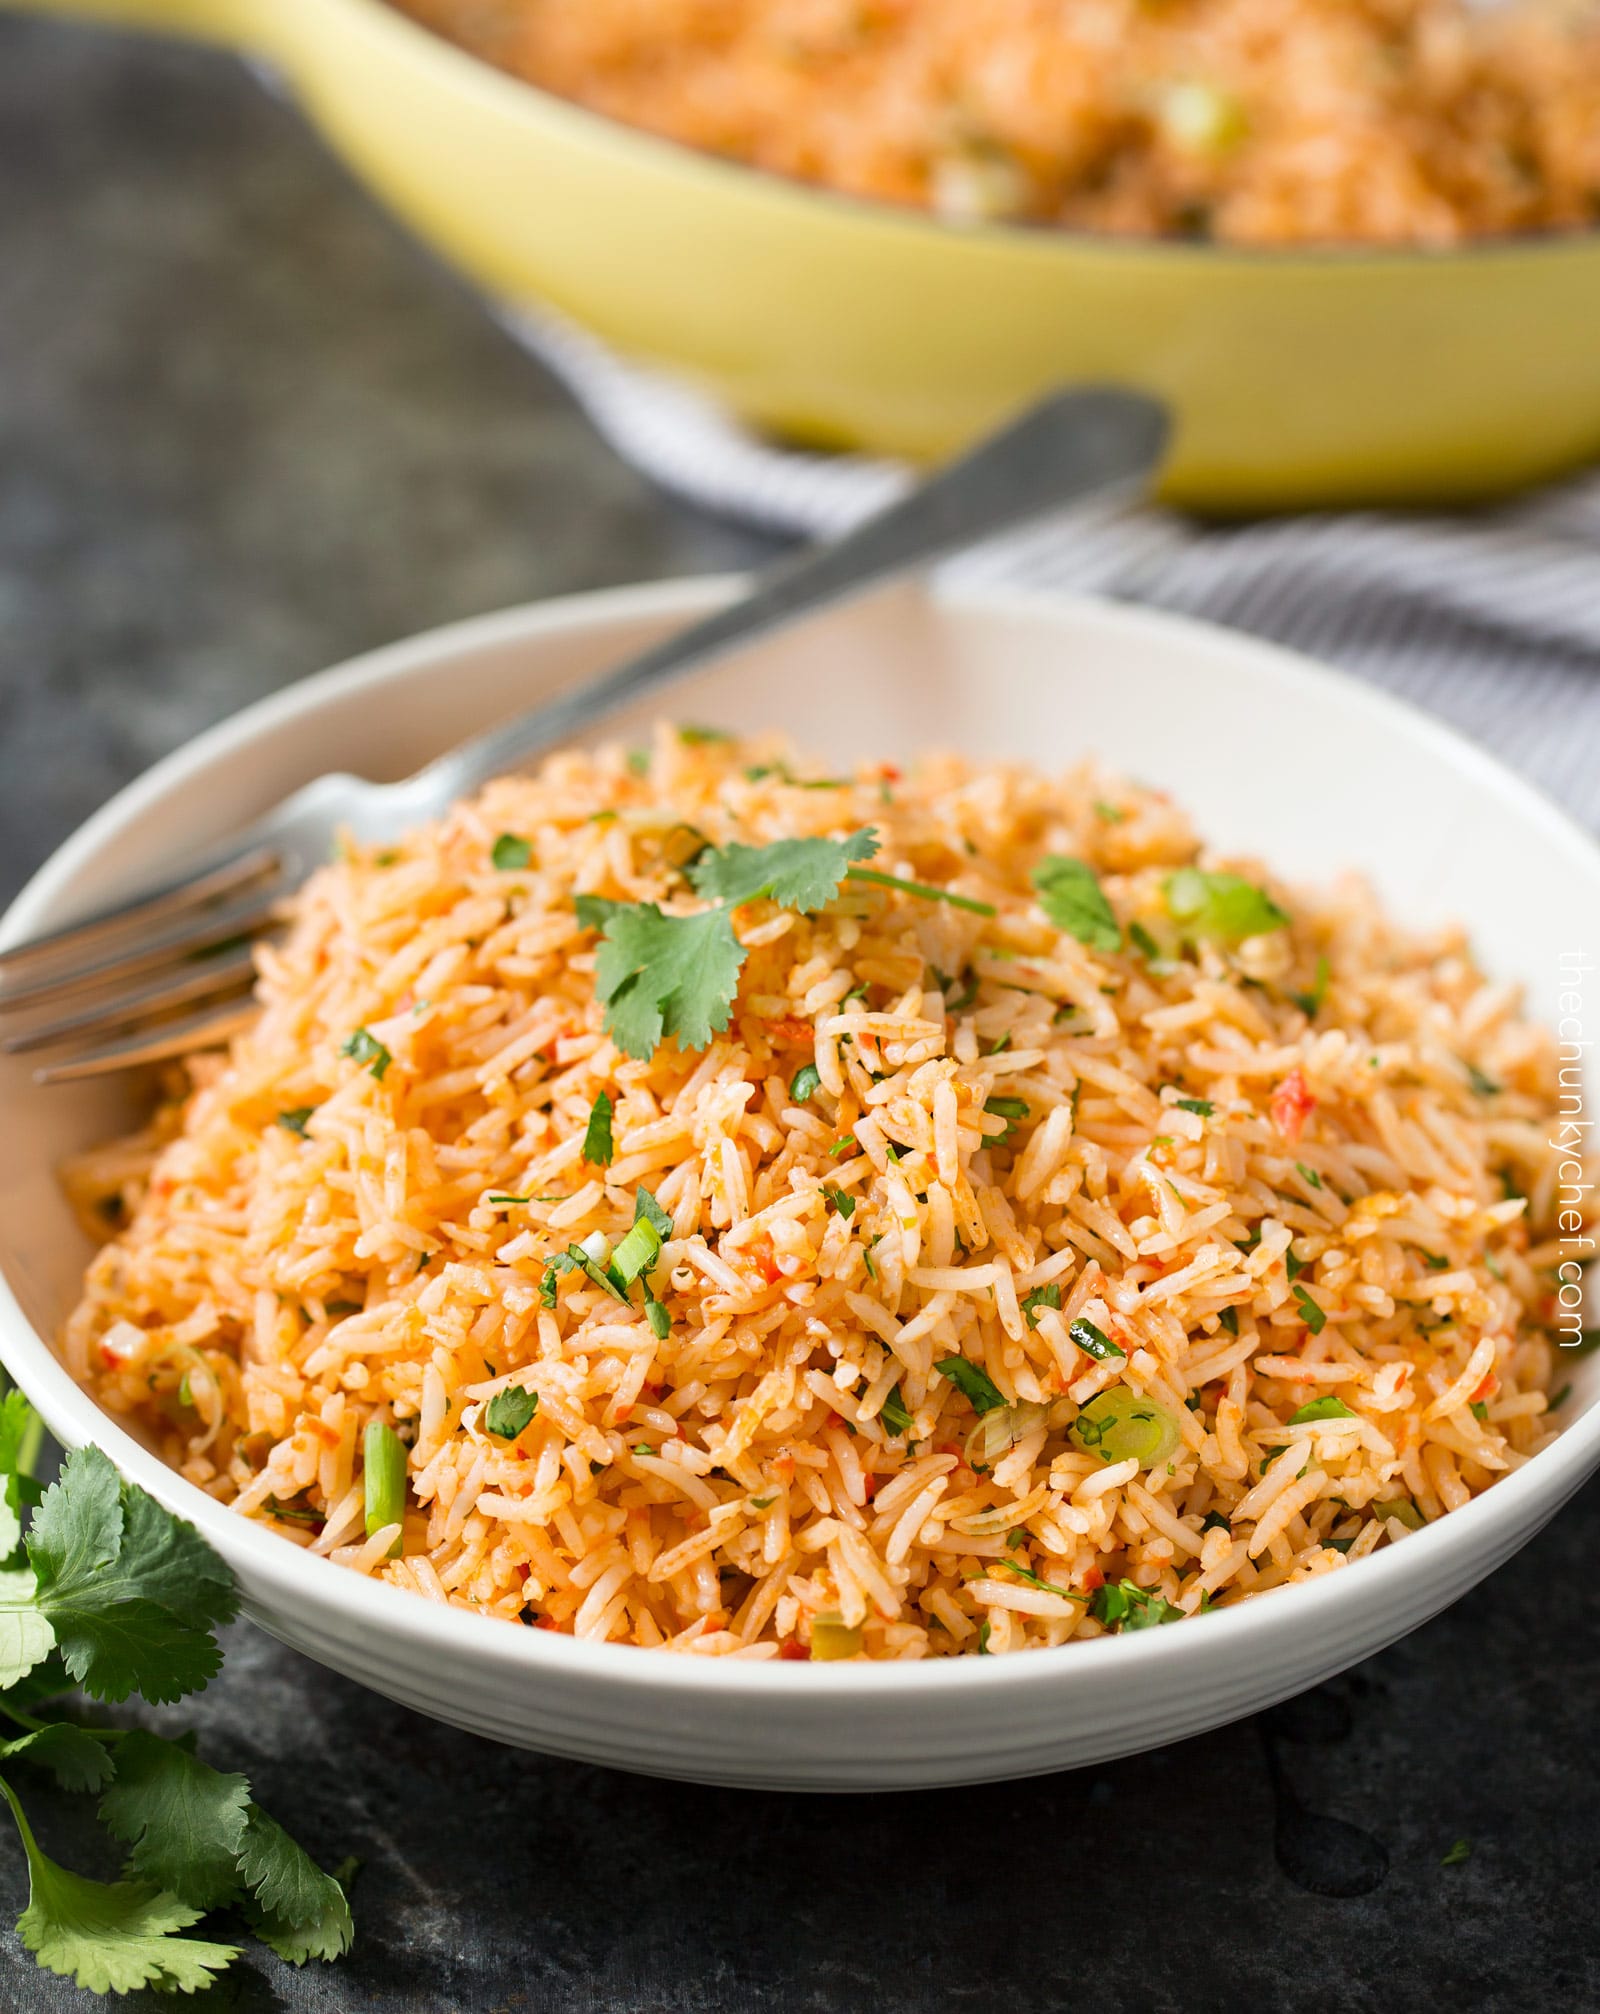 Easy Baked Mexican Rice | This foolproof method for cooking rice tastes just like the rice from your favorite Mexican restaurant... full of flavor and cooked to perfectly fluffy perfection! | http://thechunkychef.com